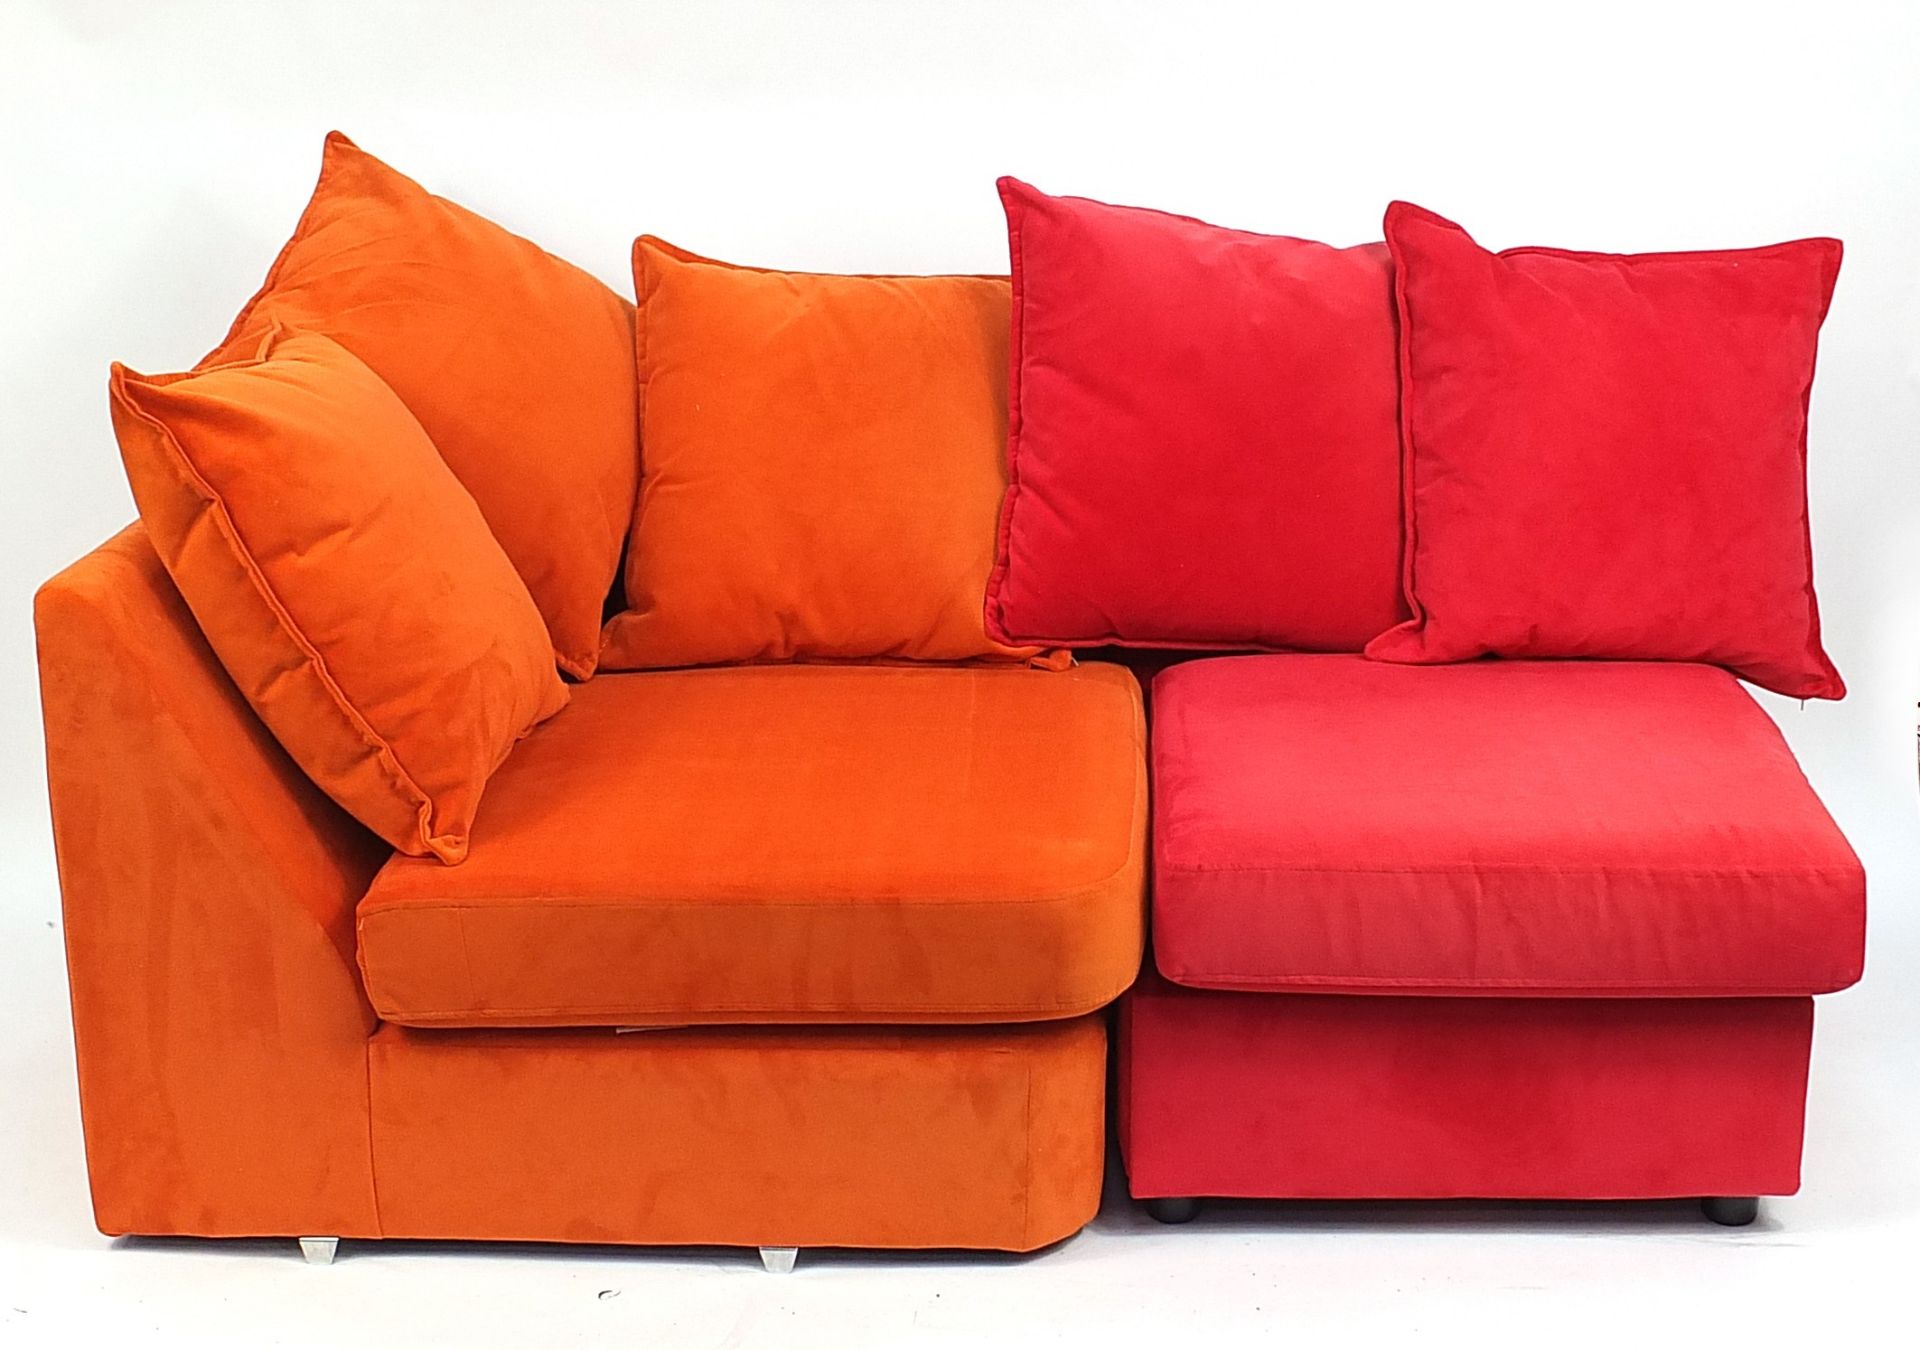 Contemporary DFS Skittle modular sofa with five sections, 88cm H x 330cm W x 240cm D as set up in - Bild 6 aus 10